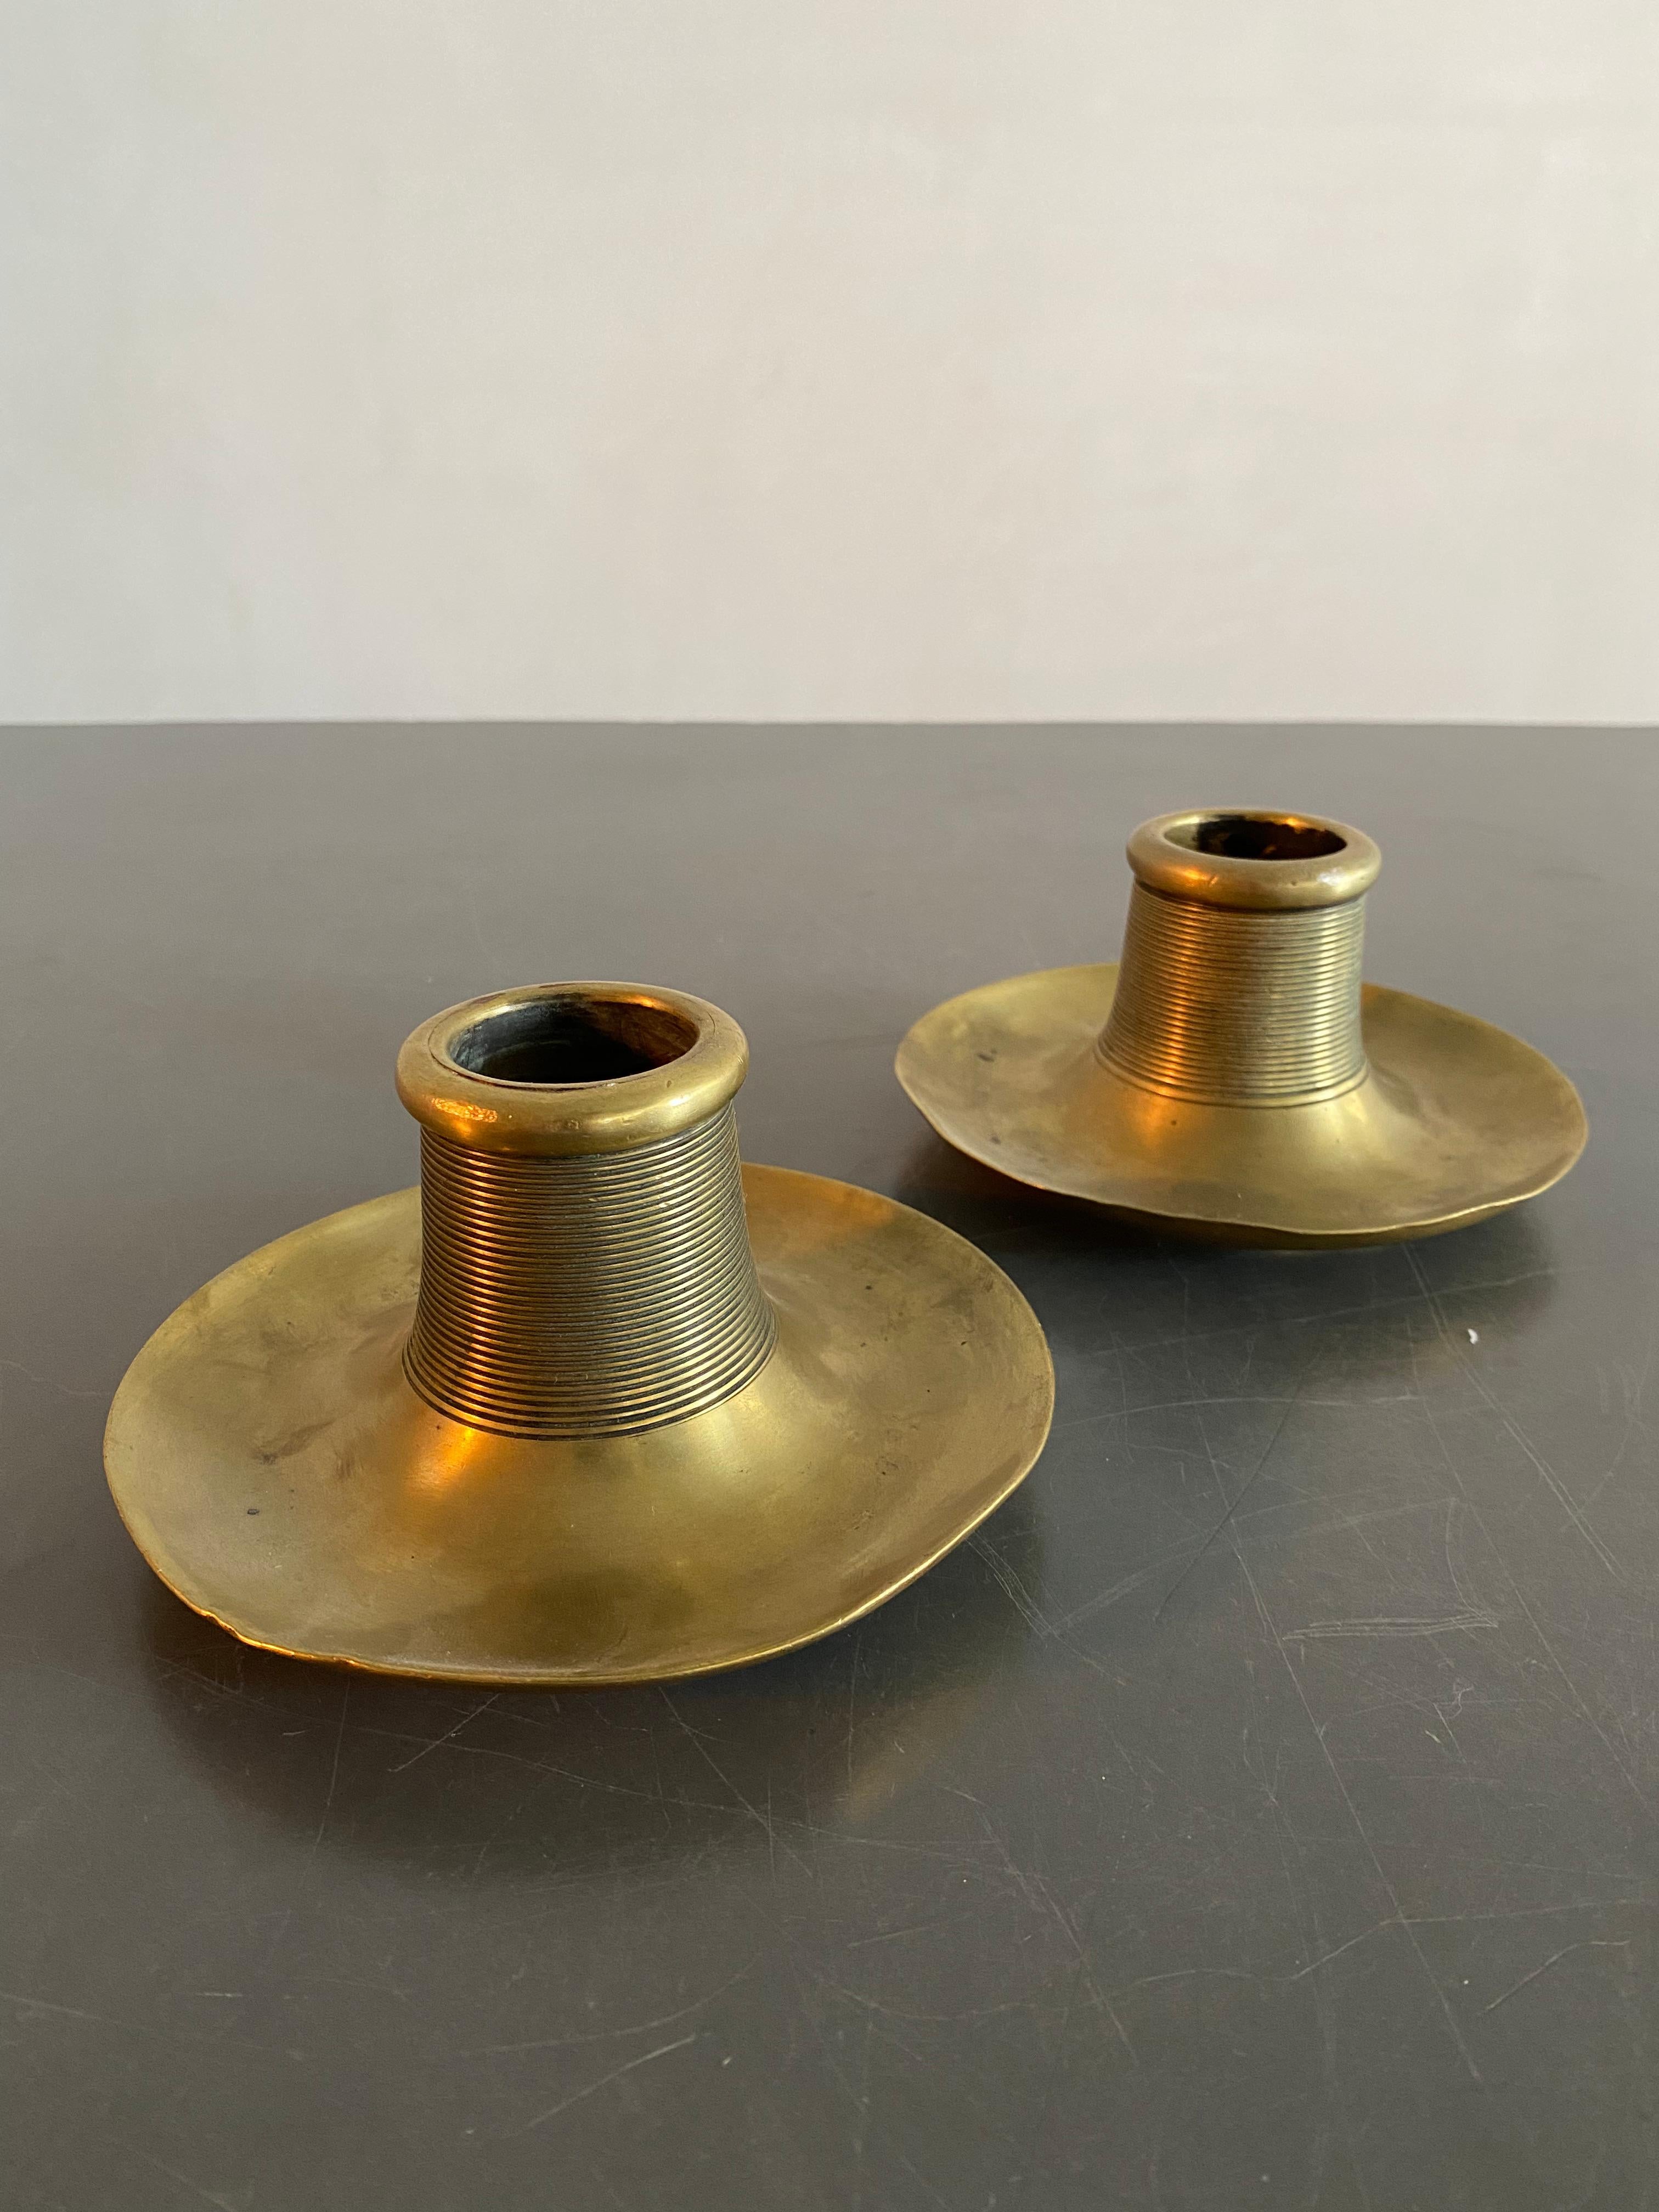 A beautiful set of 1920's gold brass candleholders from Finland.